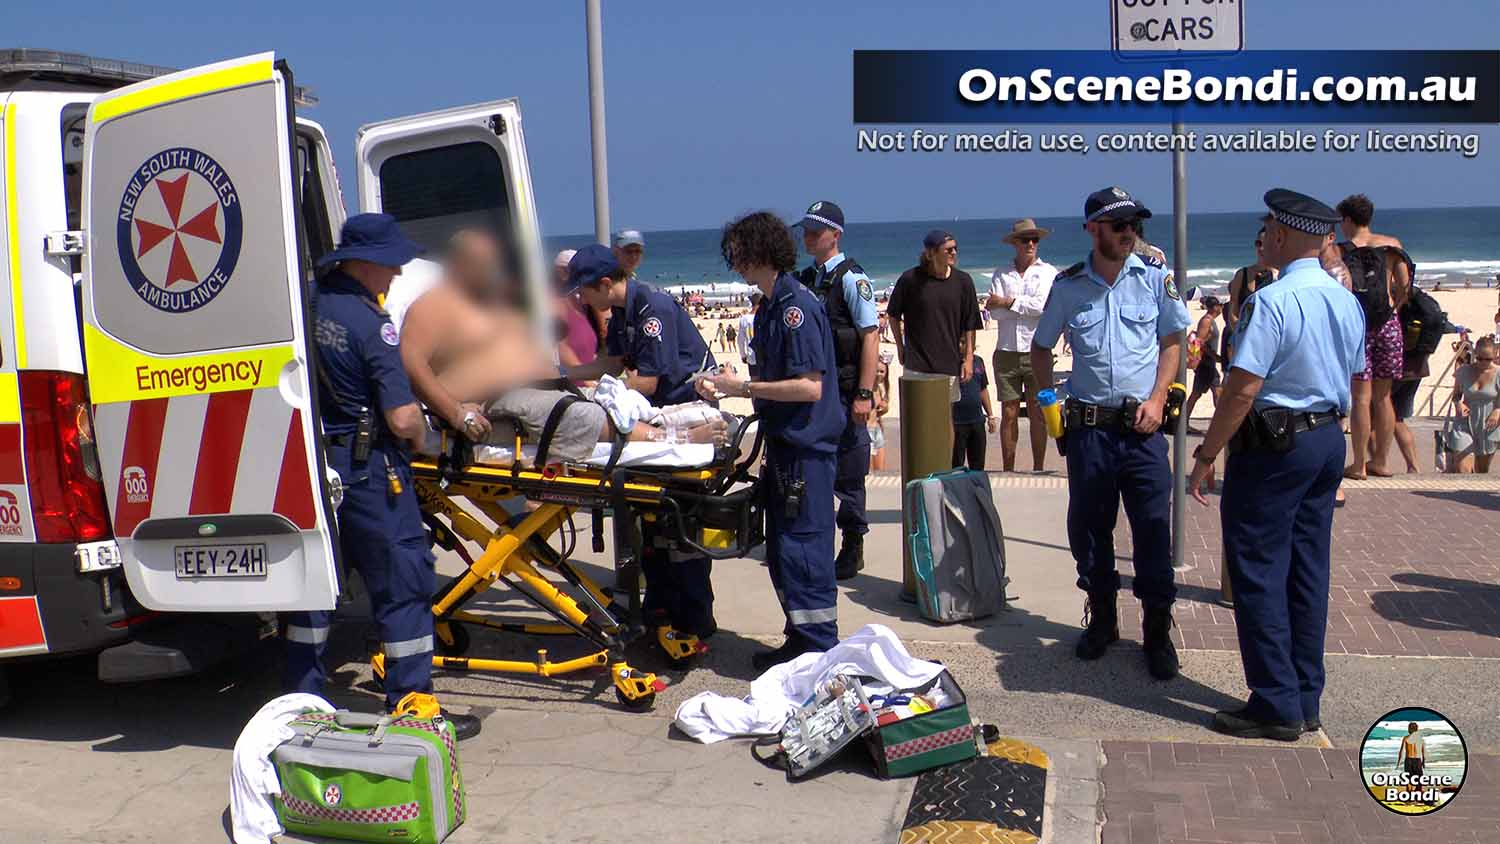 Man rescued and saved with CPR following drowning at Bondi Beach